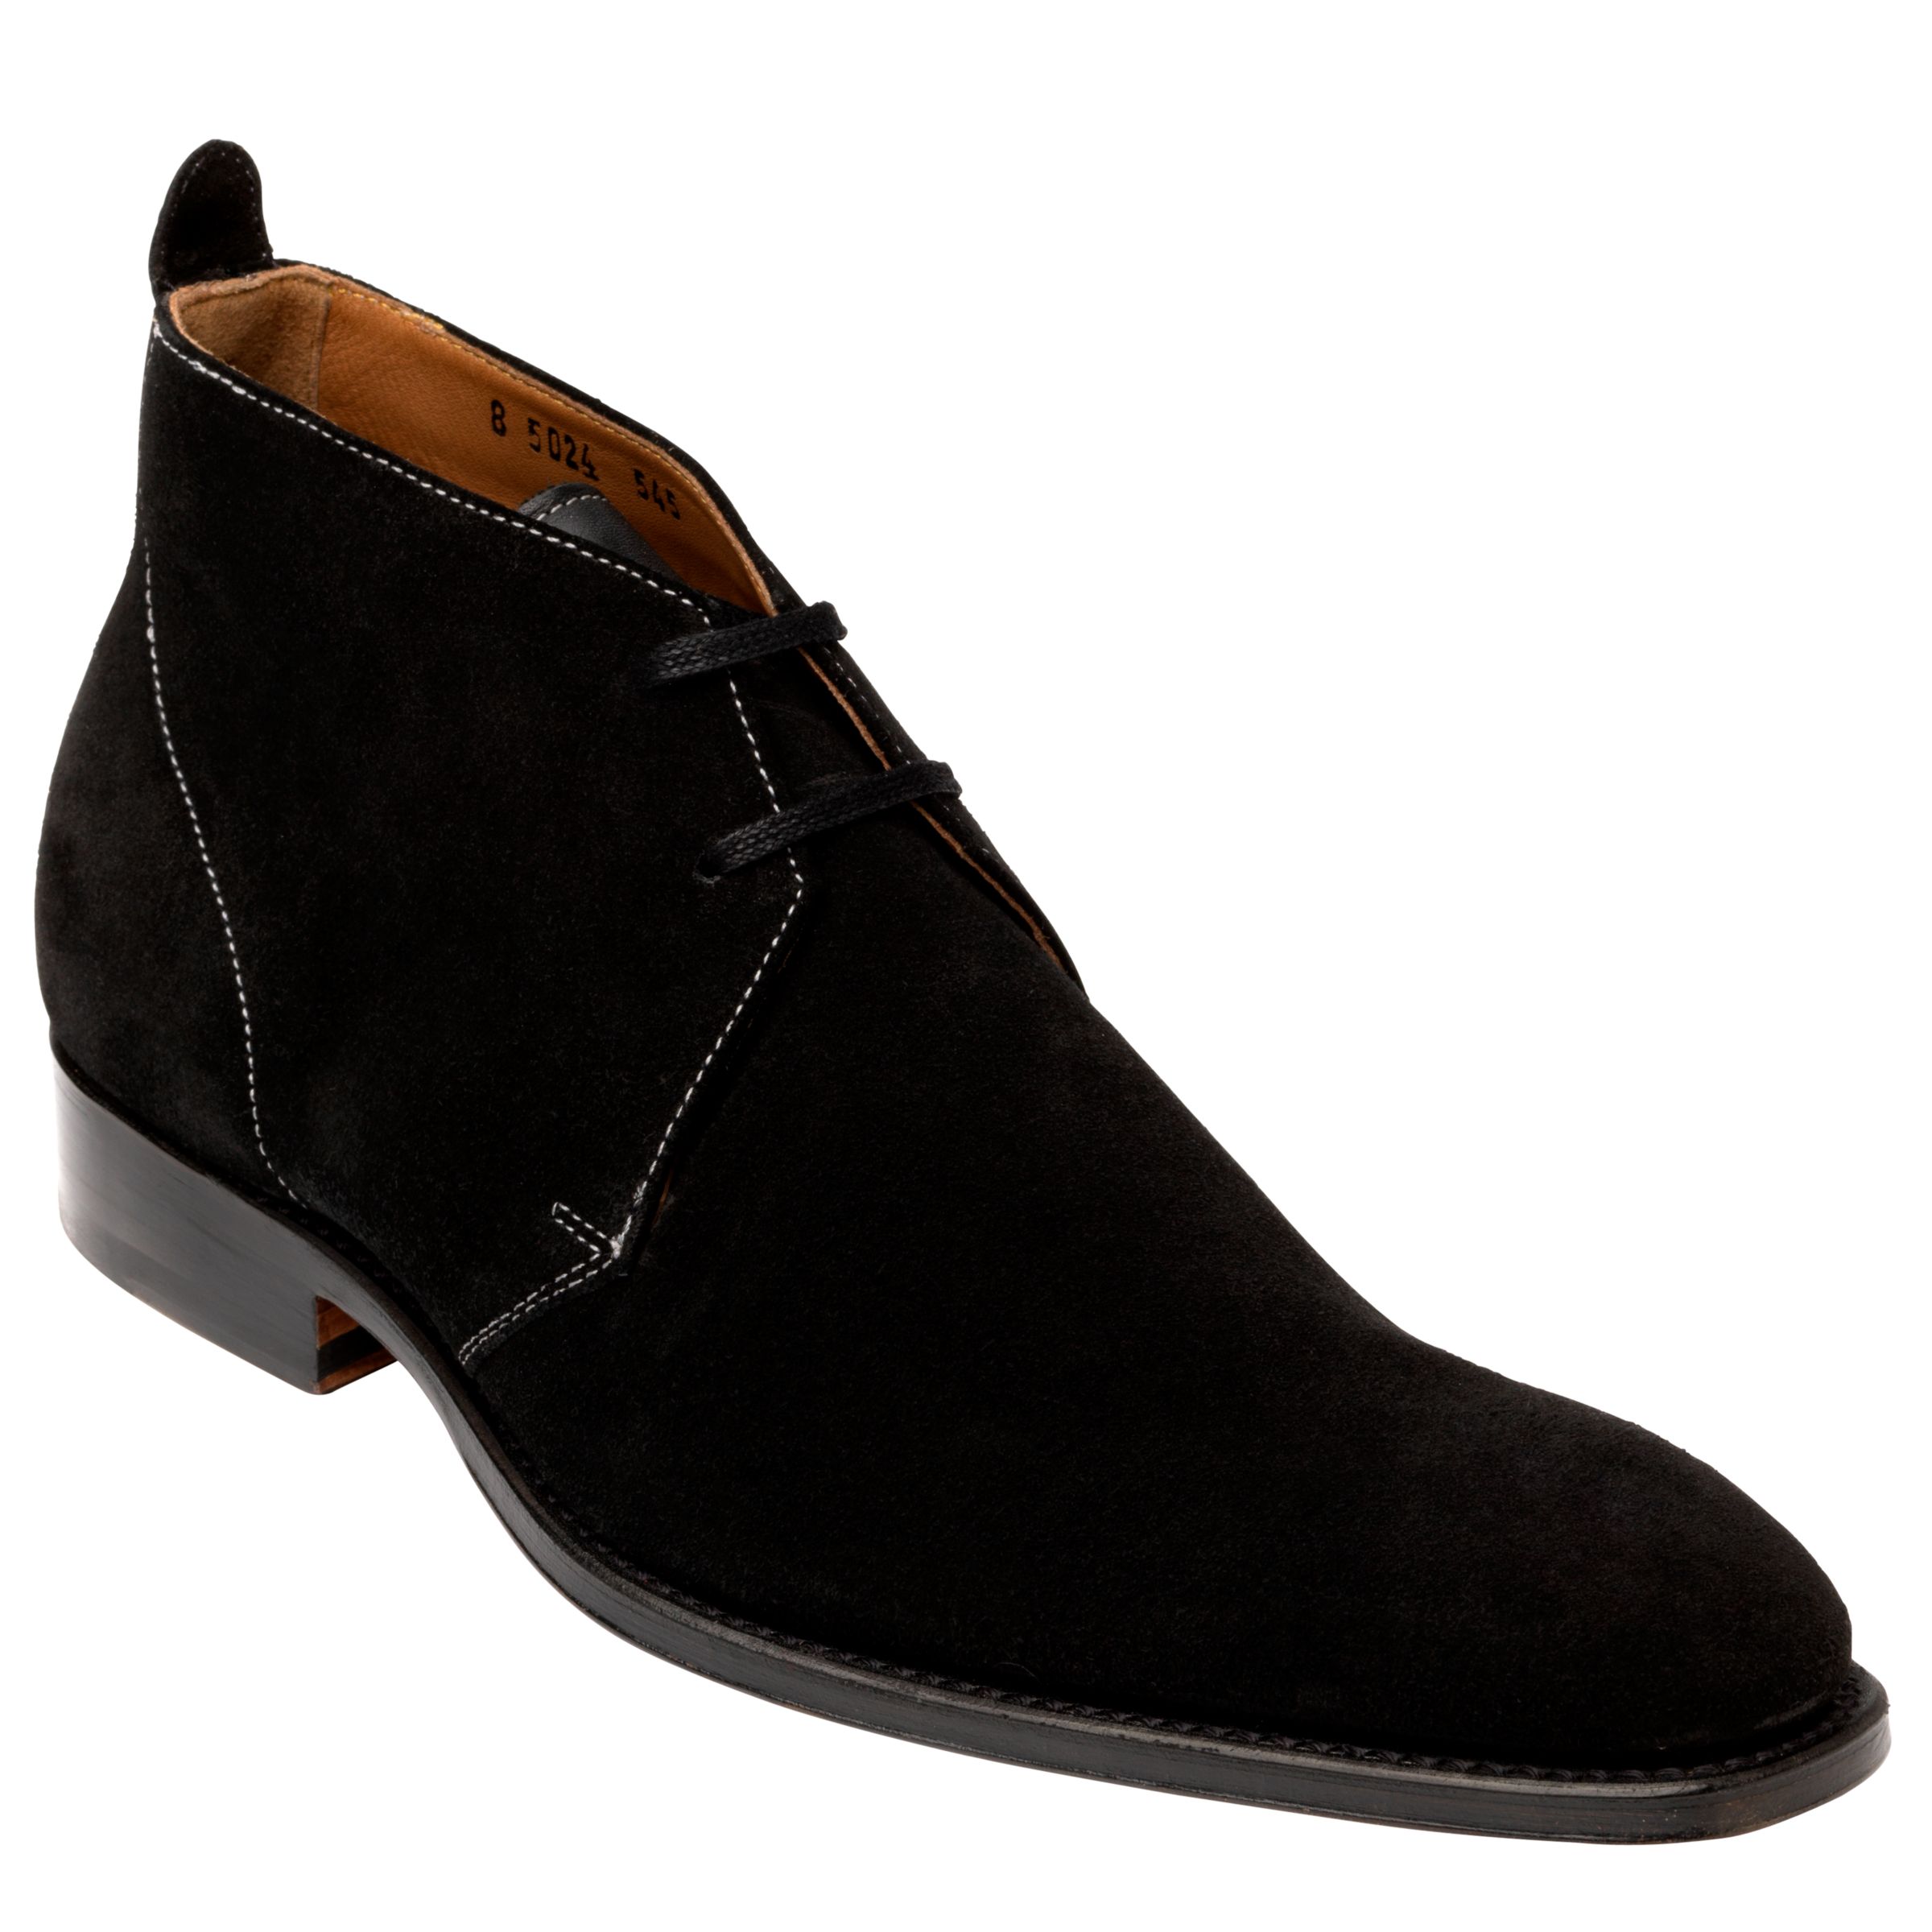 Grenson Smith Suede Chukka Boots, Black at John Lewis